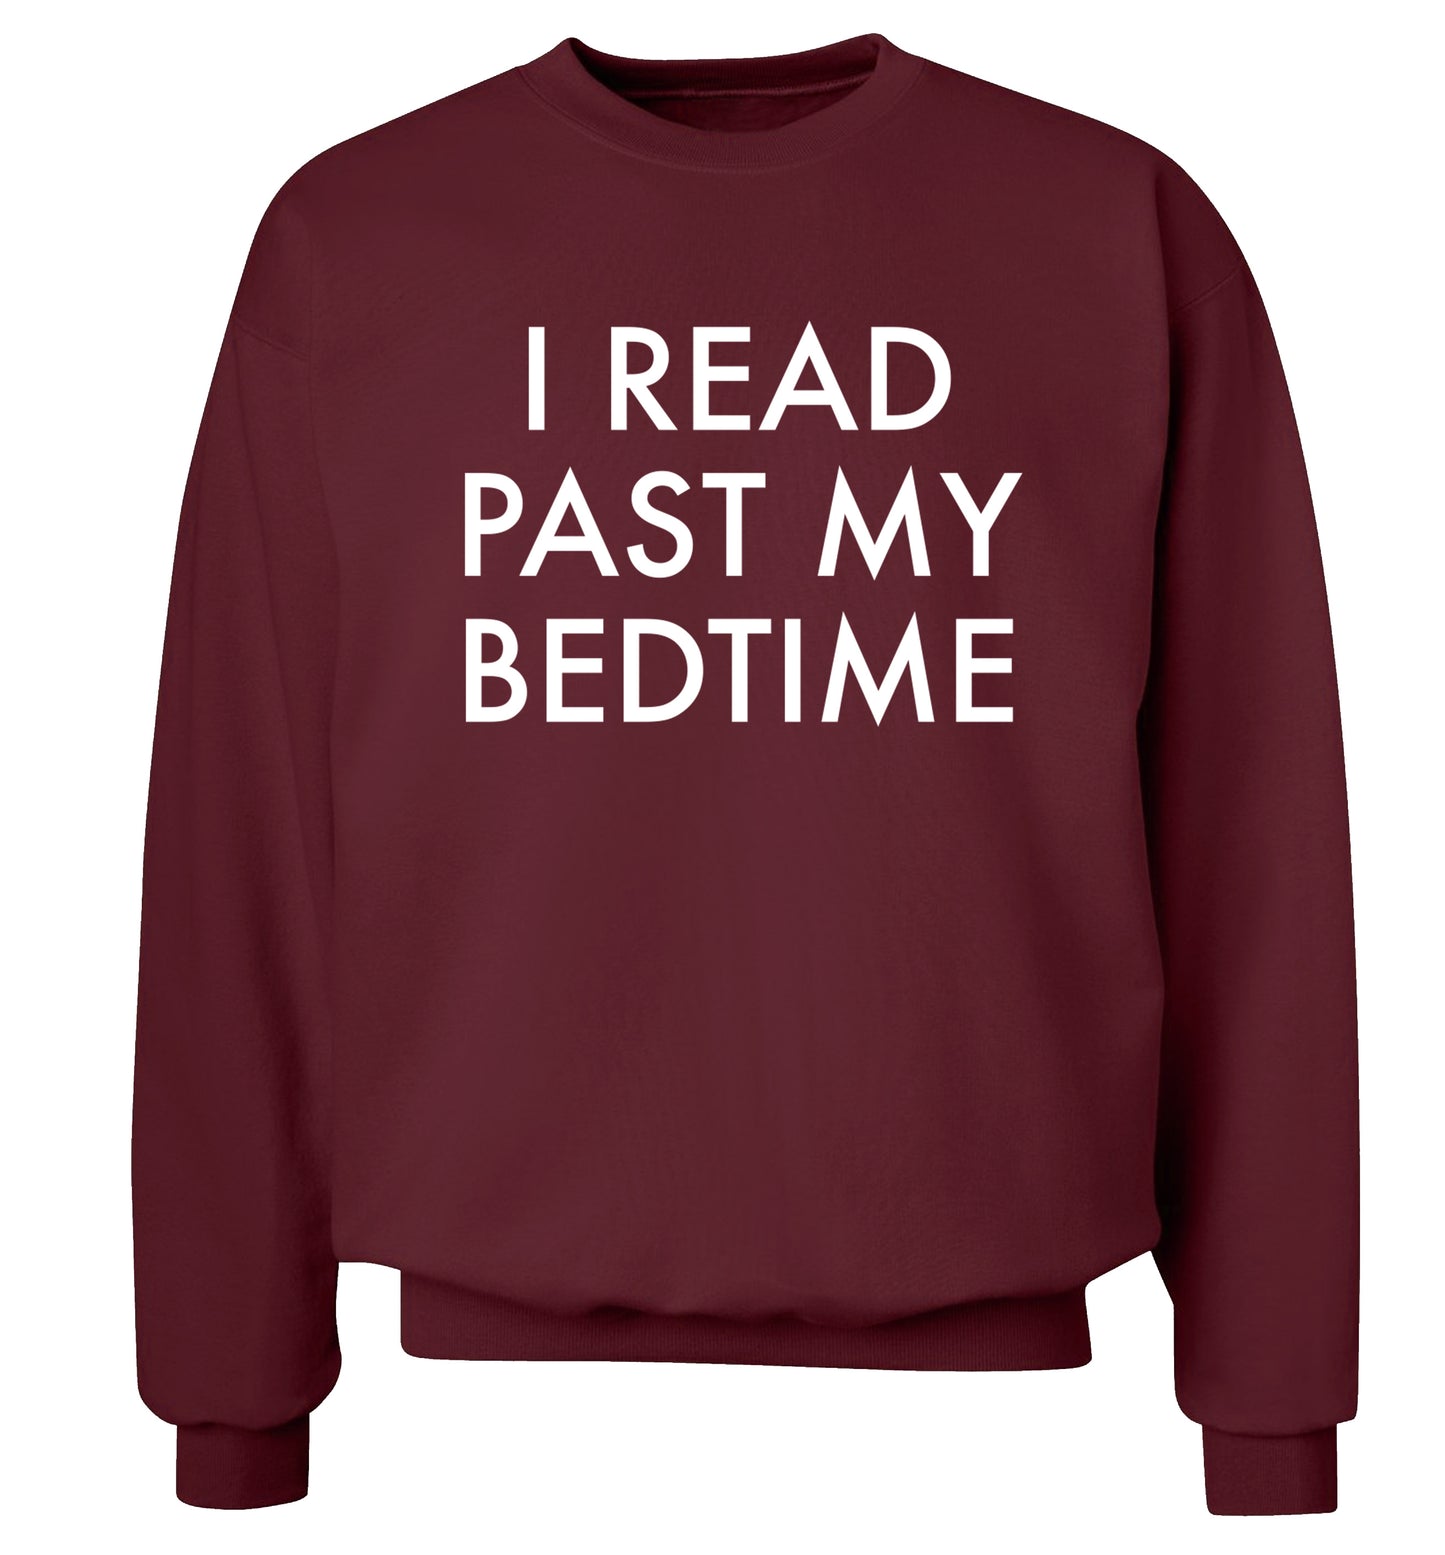 I read past my bedtime Adult's unisex maroon Sweater 2XL